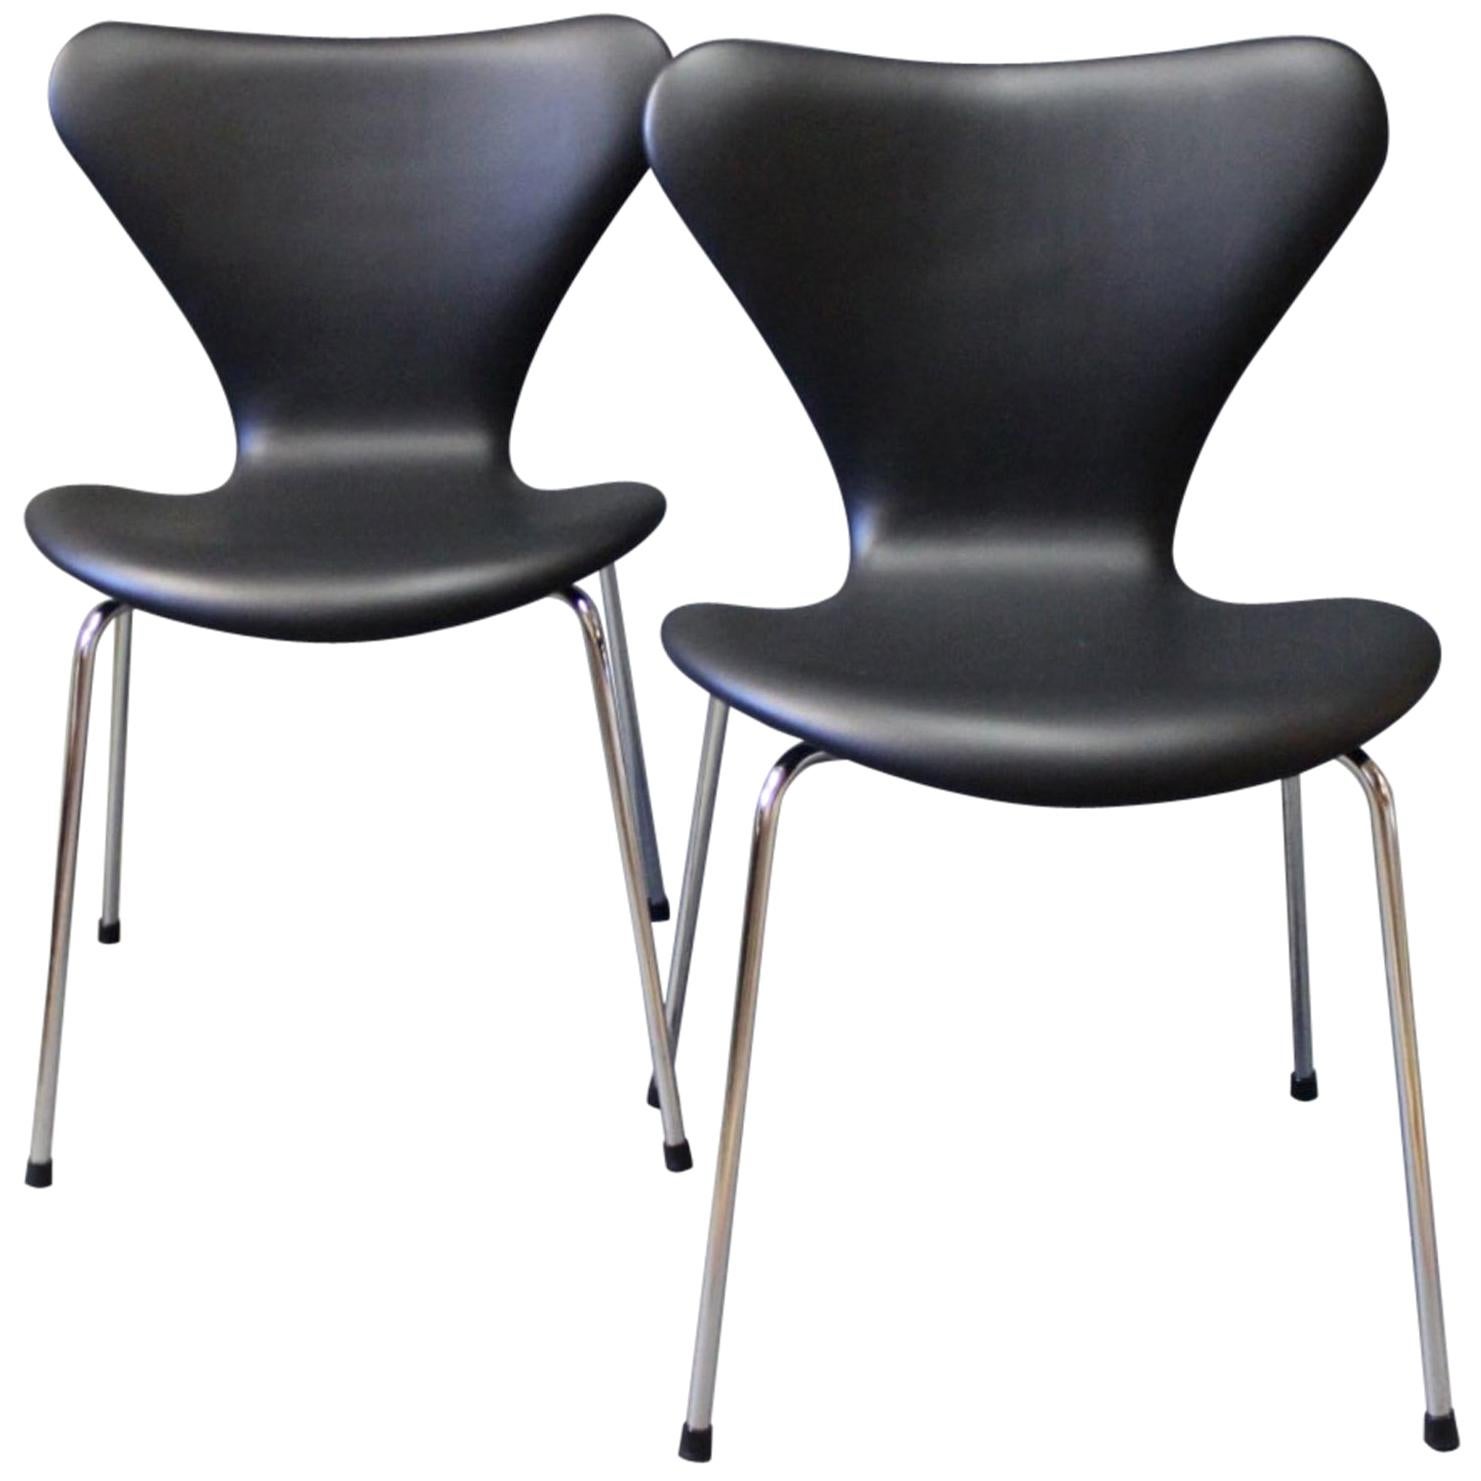 Pair of Series 7 Chairs, Model 3107, by Arne Jacobsen and Fritz Hansen, 1967